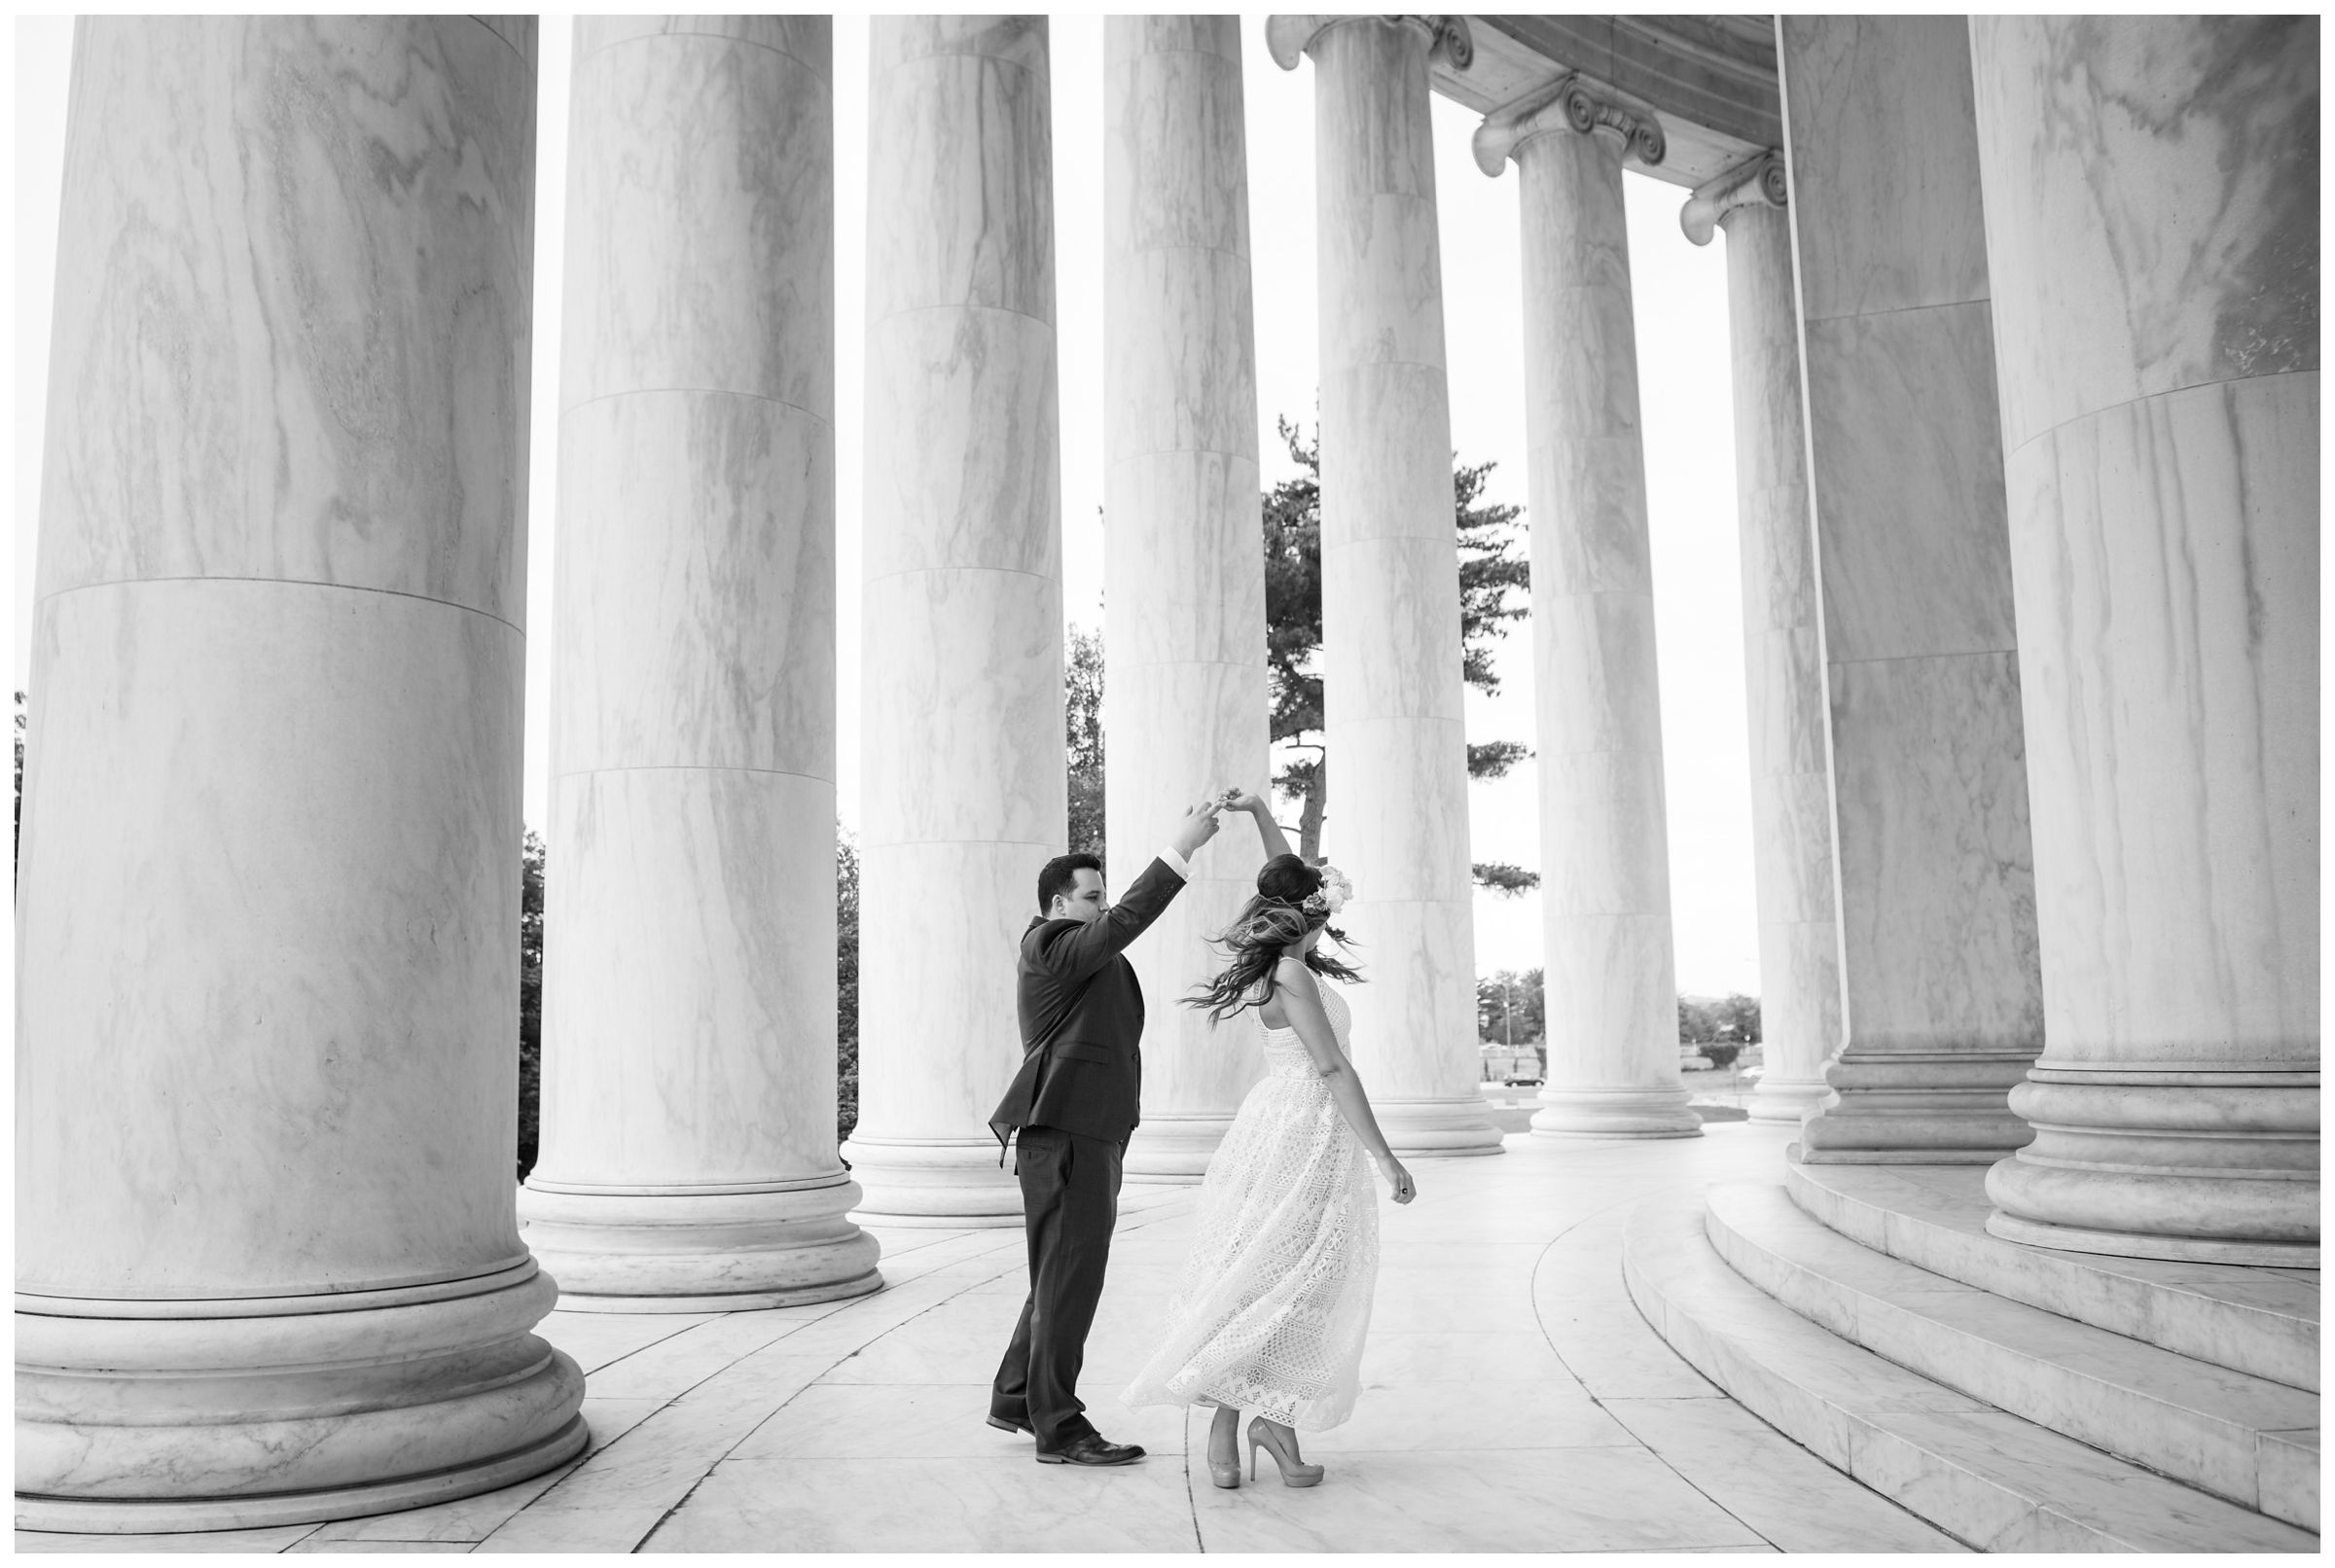 groom twirling bride amongst columns at the Jefferson Memorial during DC monument wedding day in Washington